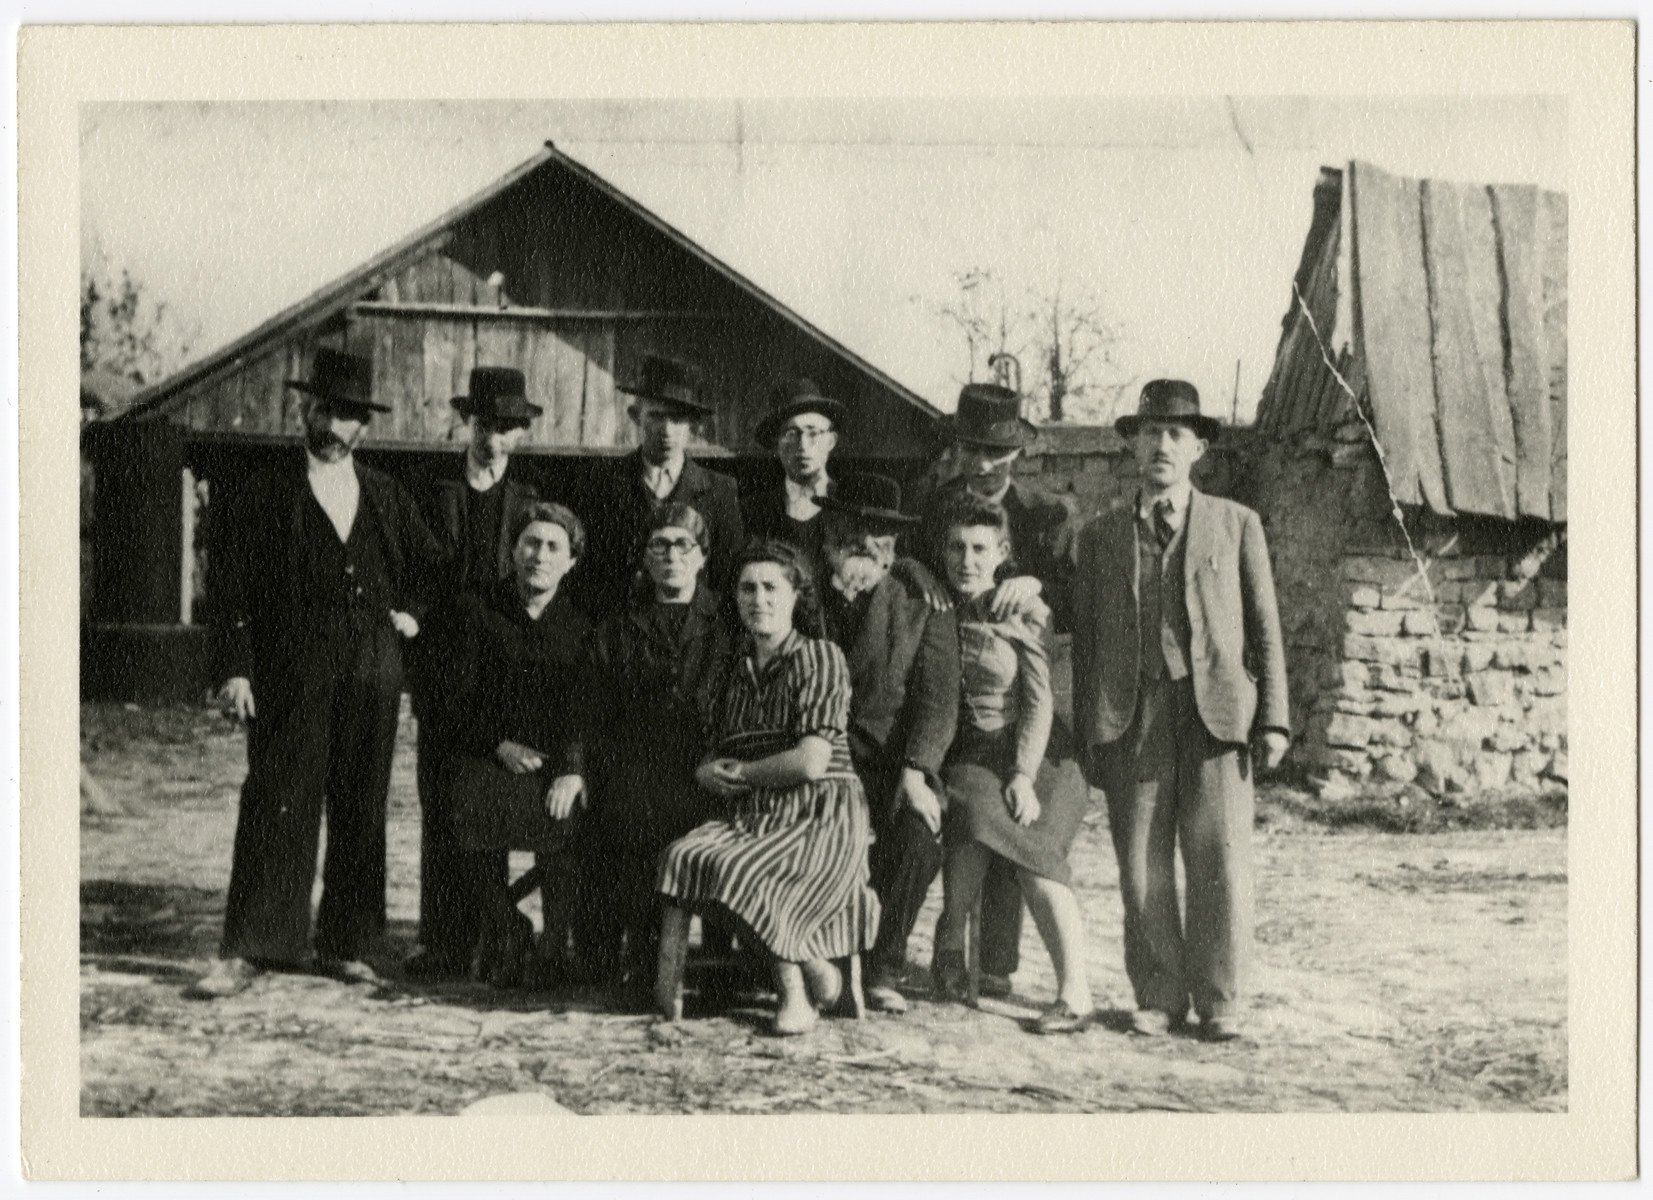 Group portrait of the extended Fogel and Mermelstein family.

From left to right are (back row): Meyer Fogel (perished), Shia Mermelstein (survived), Shulem Mermelstein (survived), Haim Leib Mermelstein (perished), Asher Mermelstein, (survived), and Boruch Mermelstein (perished).
 
Front row:  Malvina Mermelstein Heimfeld (survived), Tzivia Mermelstein (grandmother of the donor, perished), Rose Mermelstein (survived), Hersh Mermelstein (grandfather of the donor, perished), Pearl (Piri) Mermelstein (perished).